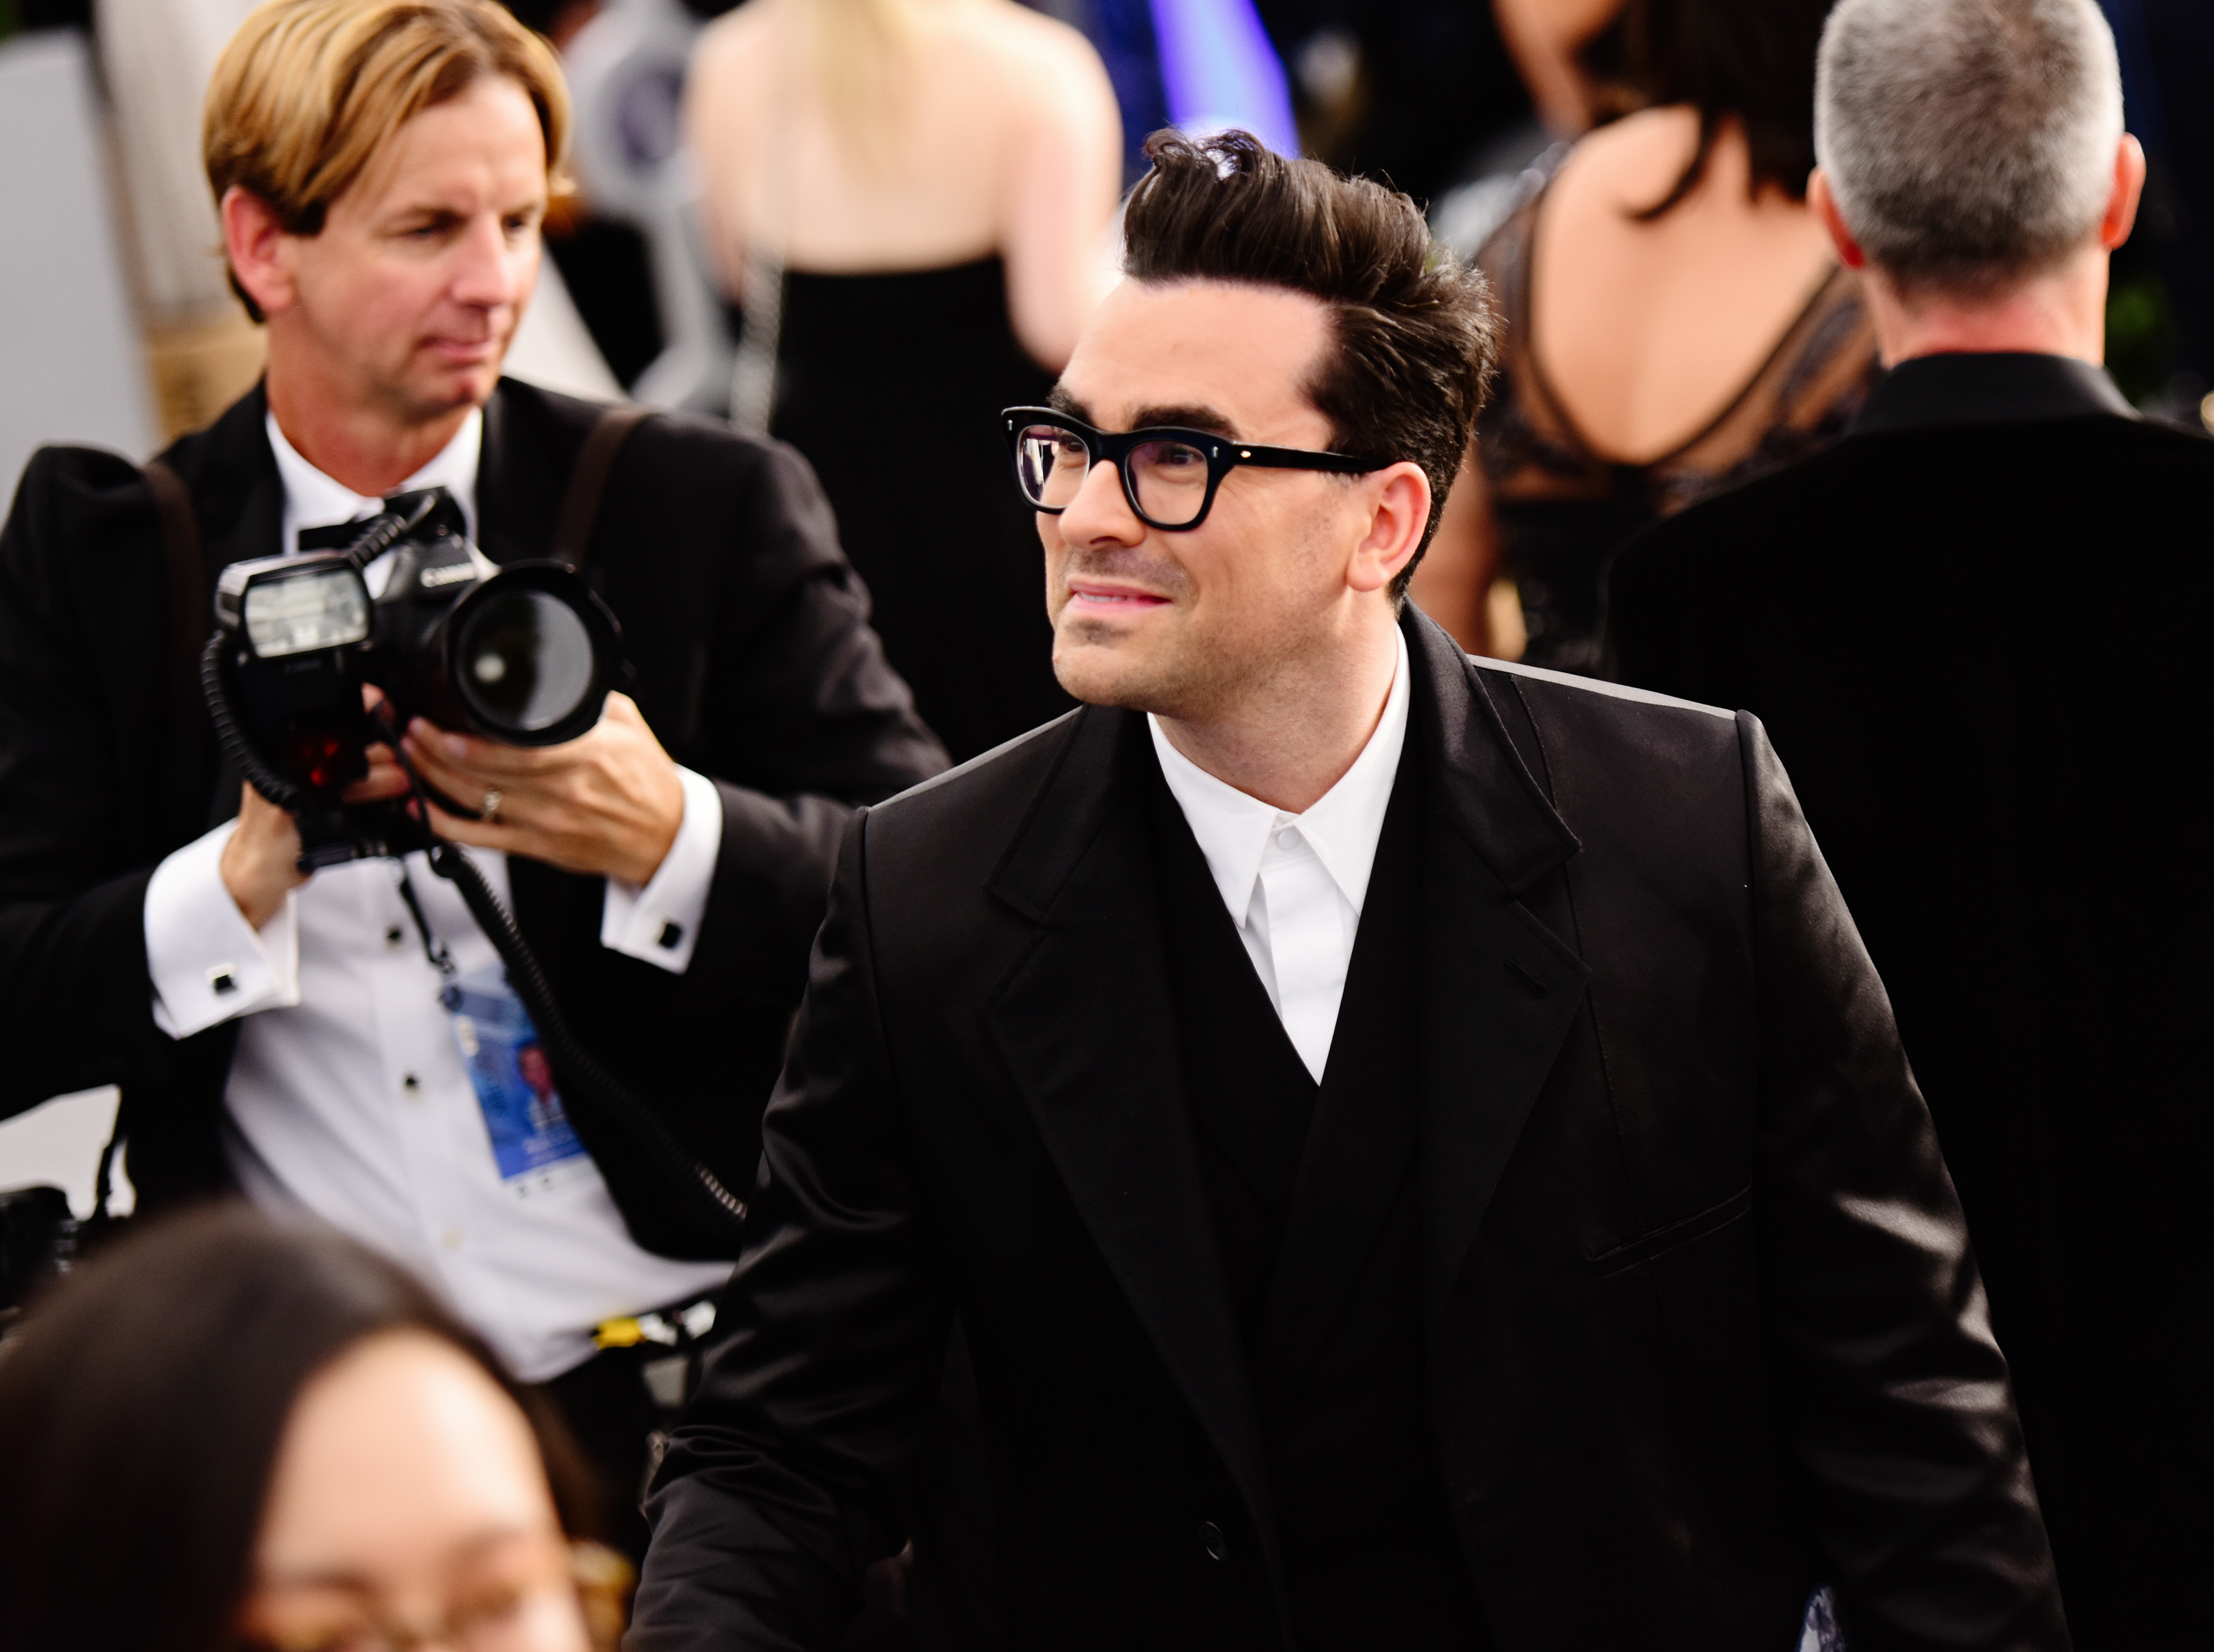 Dan Levy during the 26th annual Screen Actors Guild Awards at The Shrine Auditorium on January 19, 2020, in Los Angeles, California. | Source: Getty Images